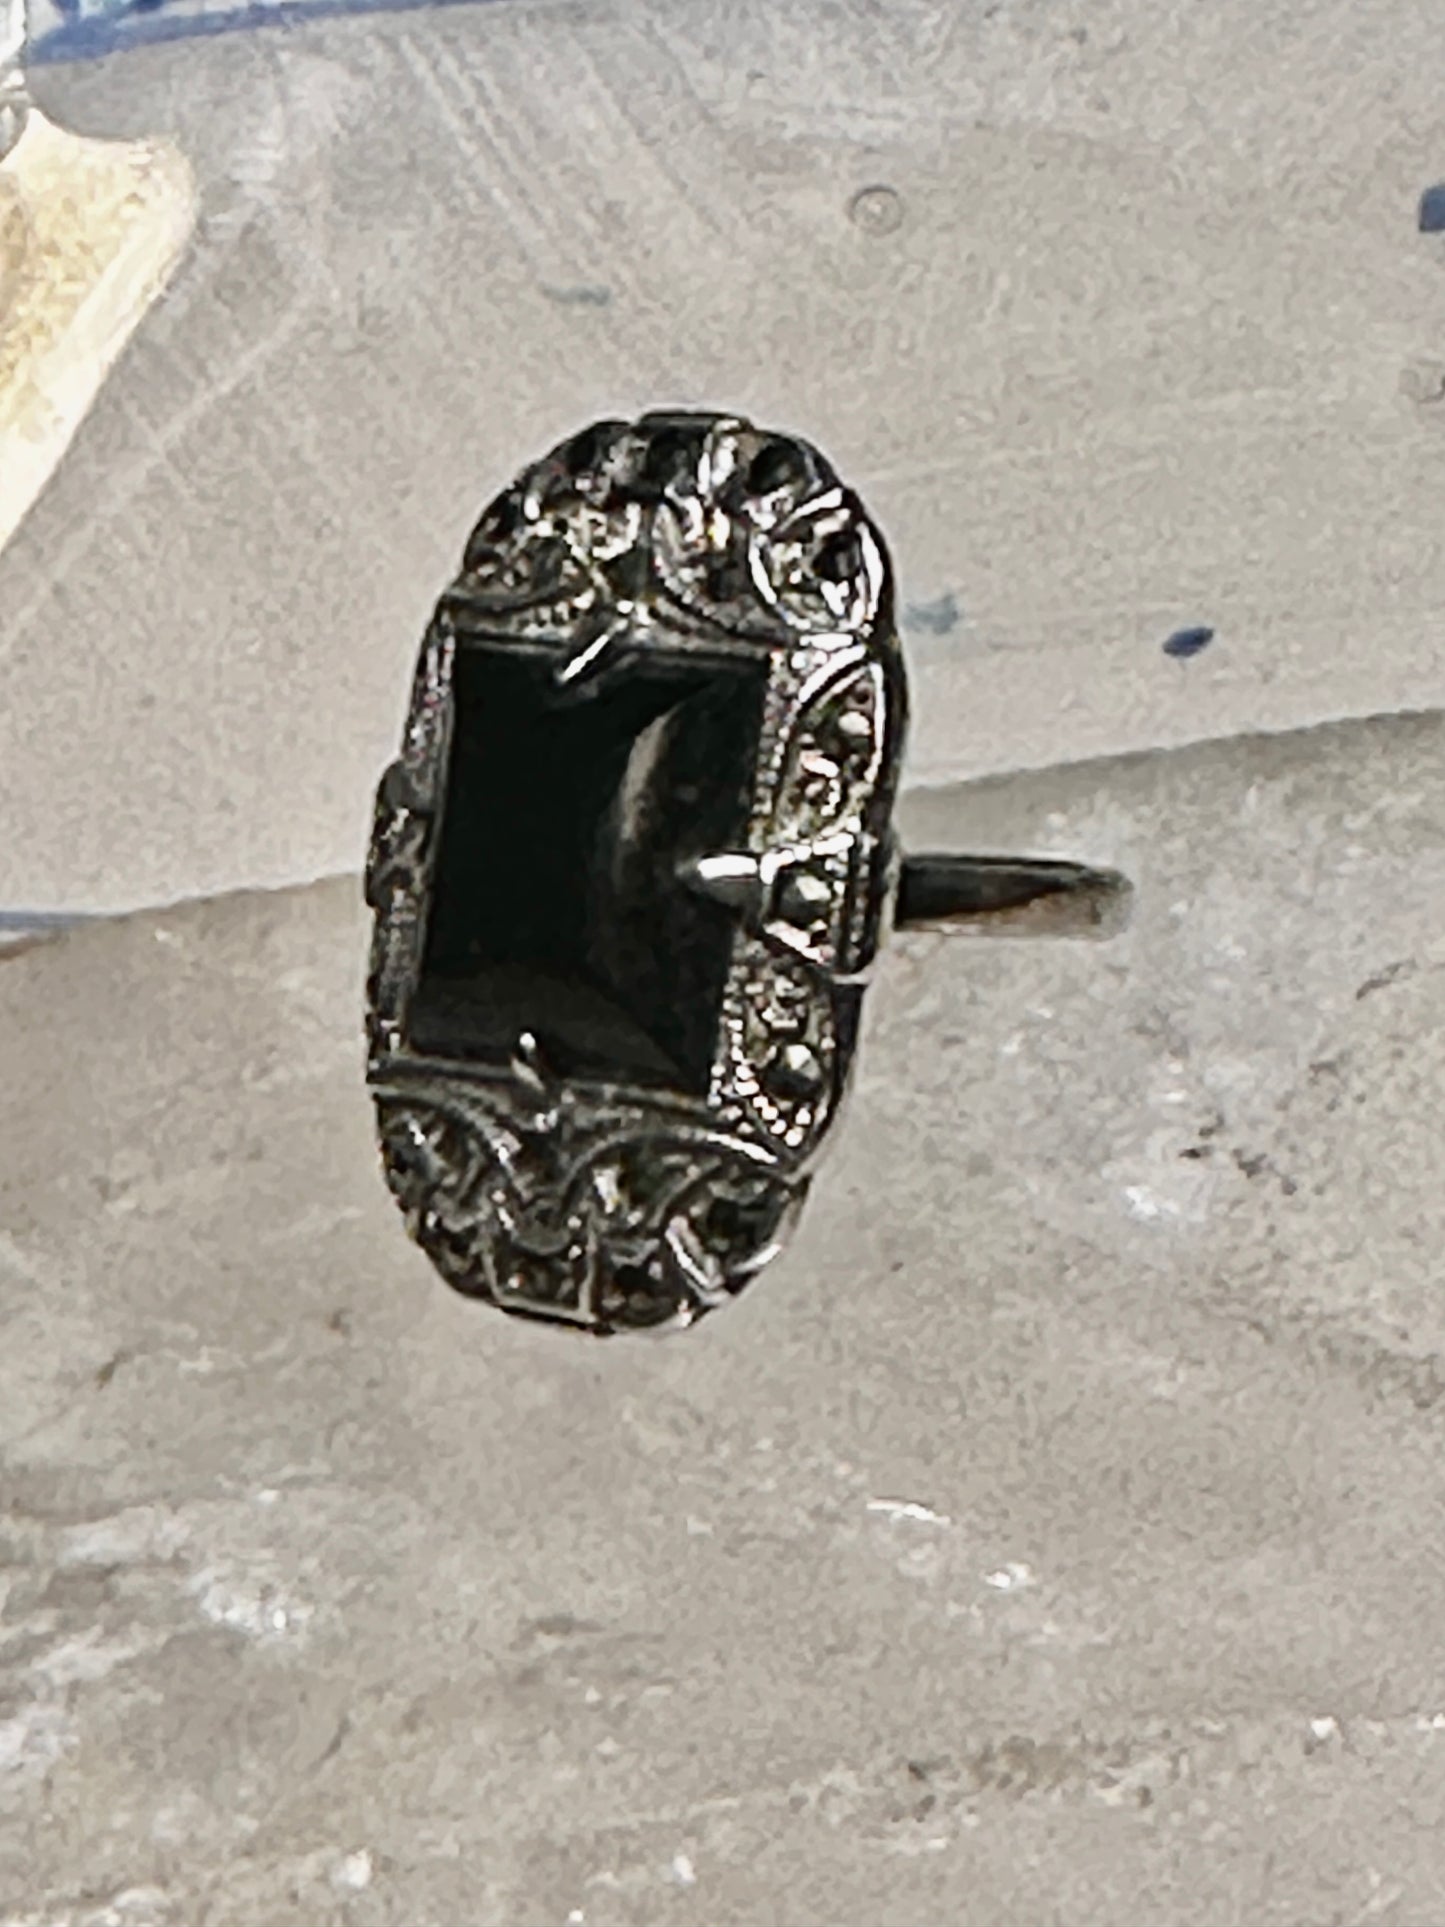 Onyx ring Art Deco size 5.75 mrcasites mourning sterling silver women